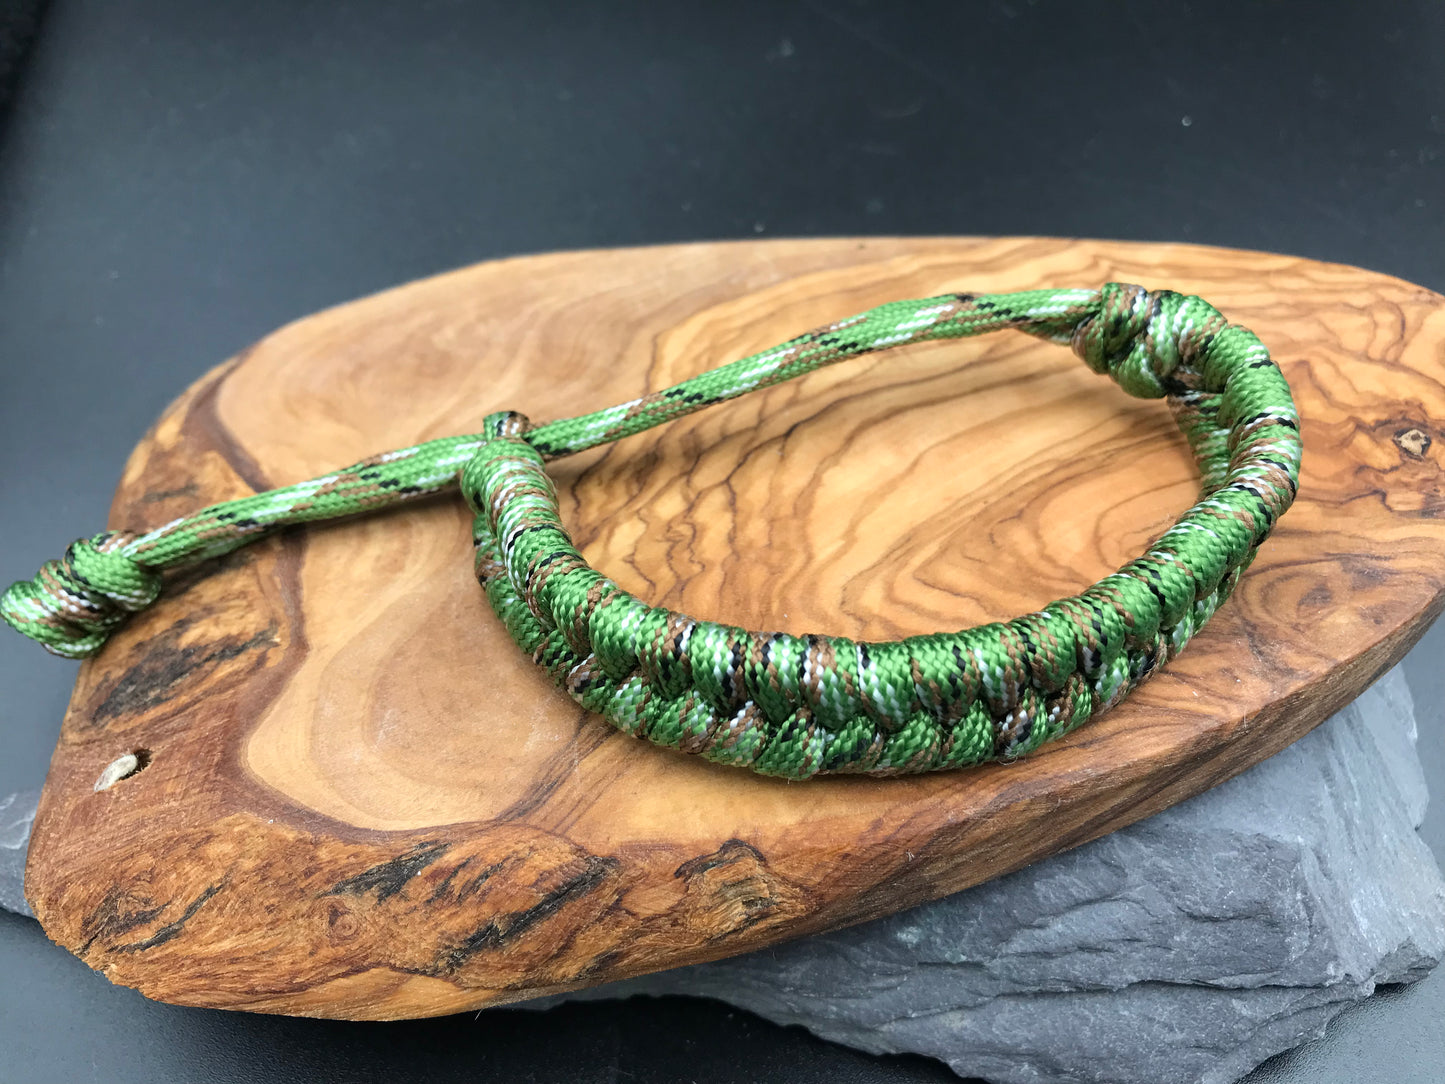 Handmade Paracord Fishtail weave bracelet in Forest green camo a mix of greens and some brown